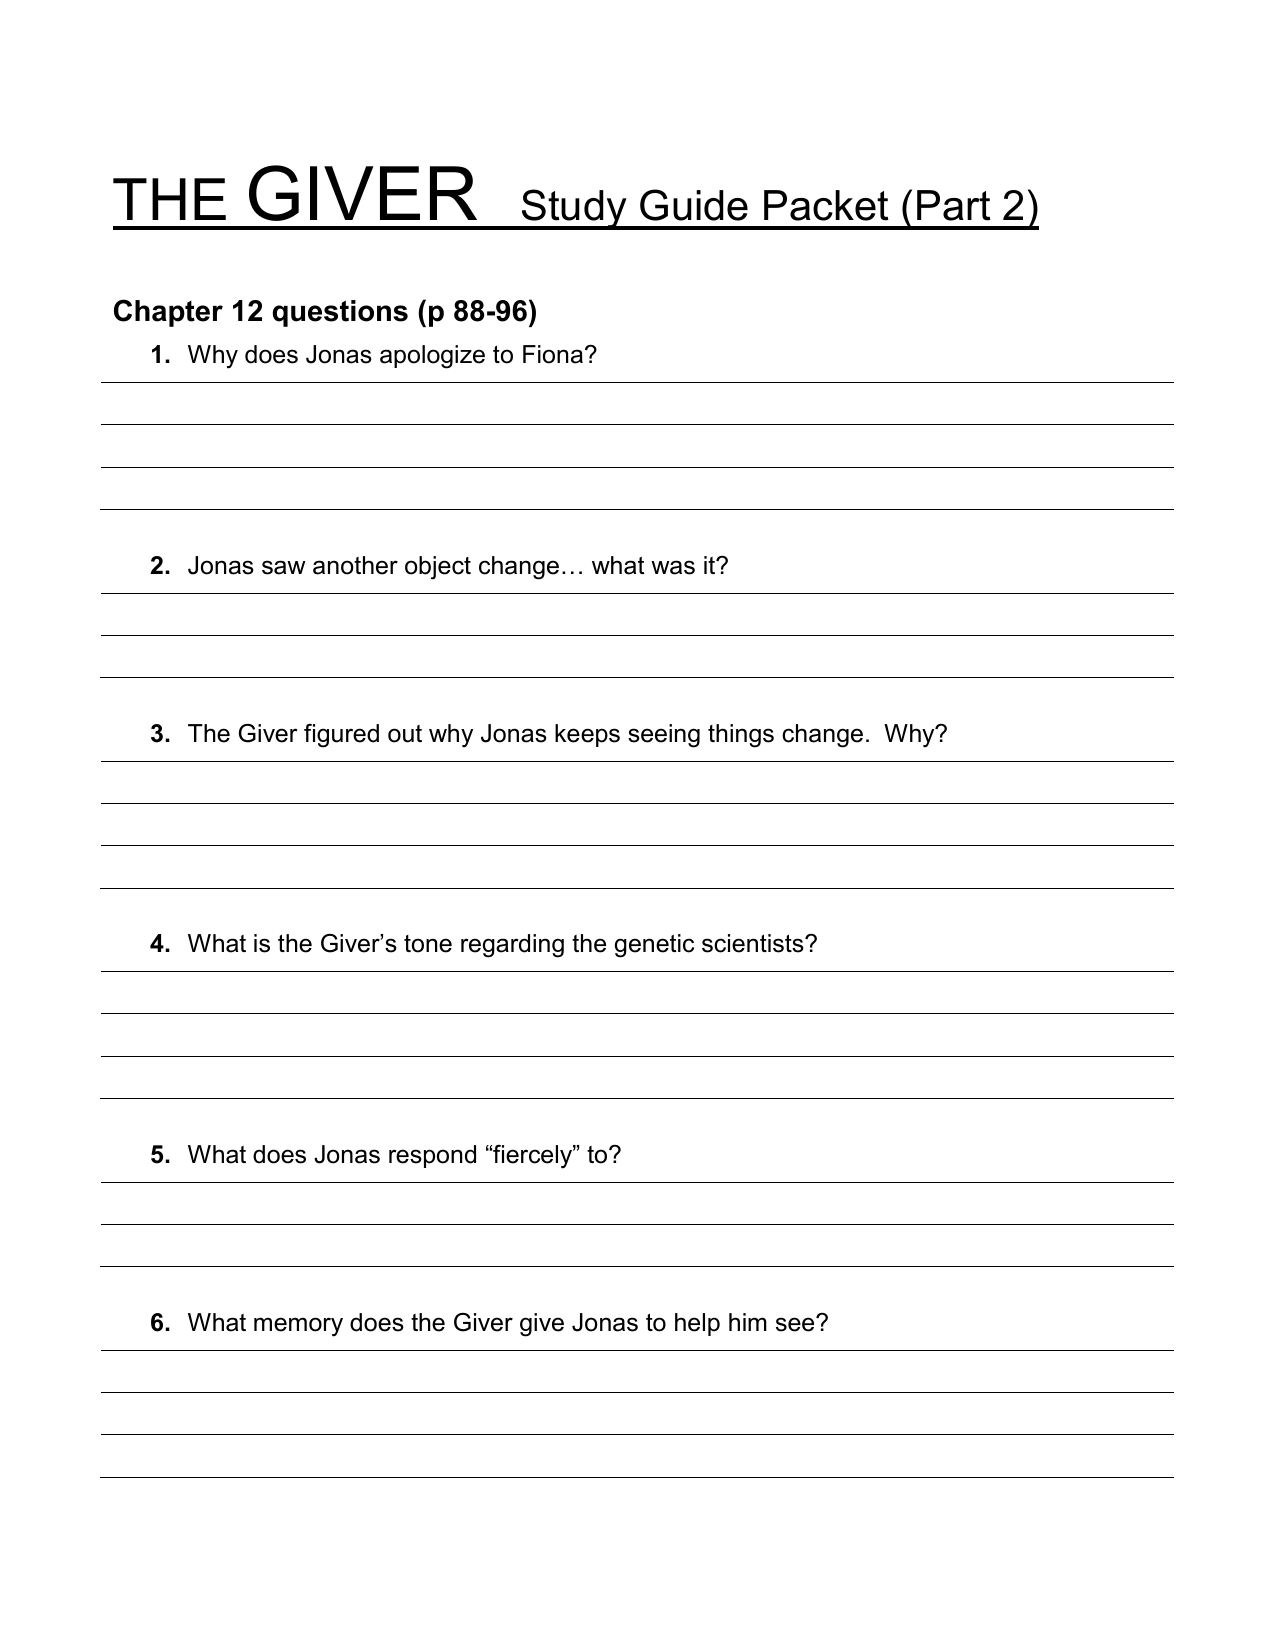 writing assignment for the giver